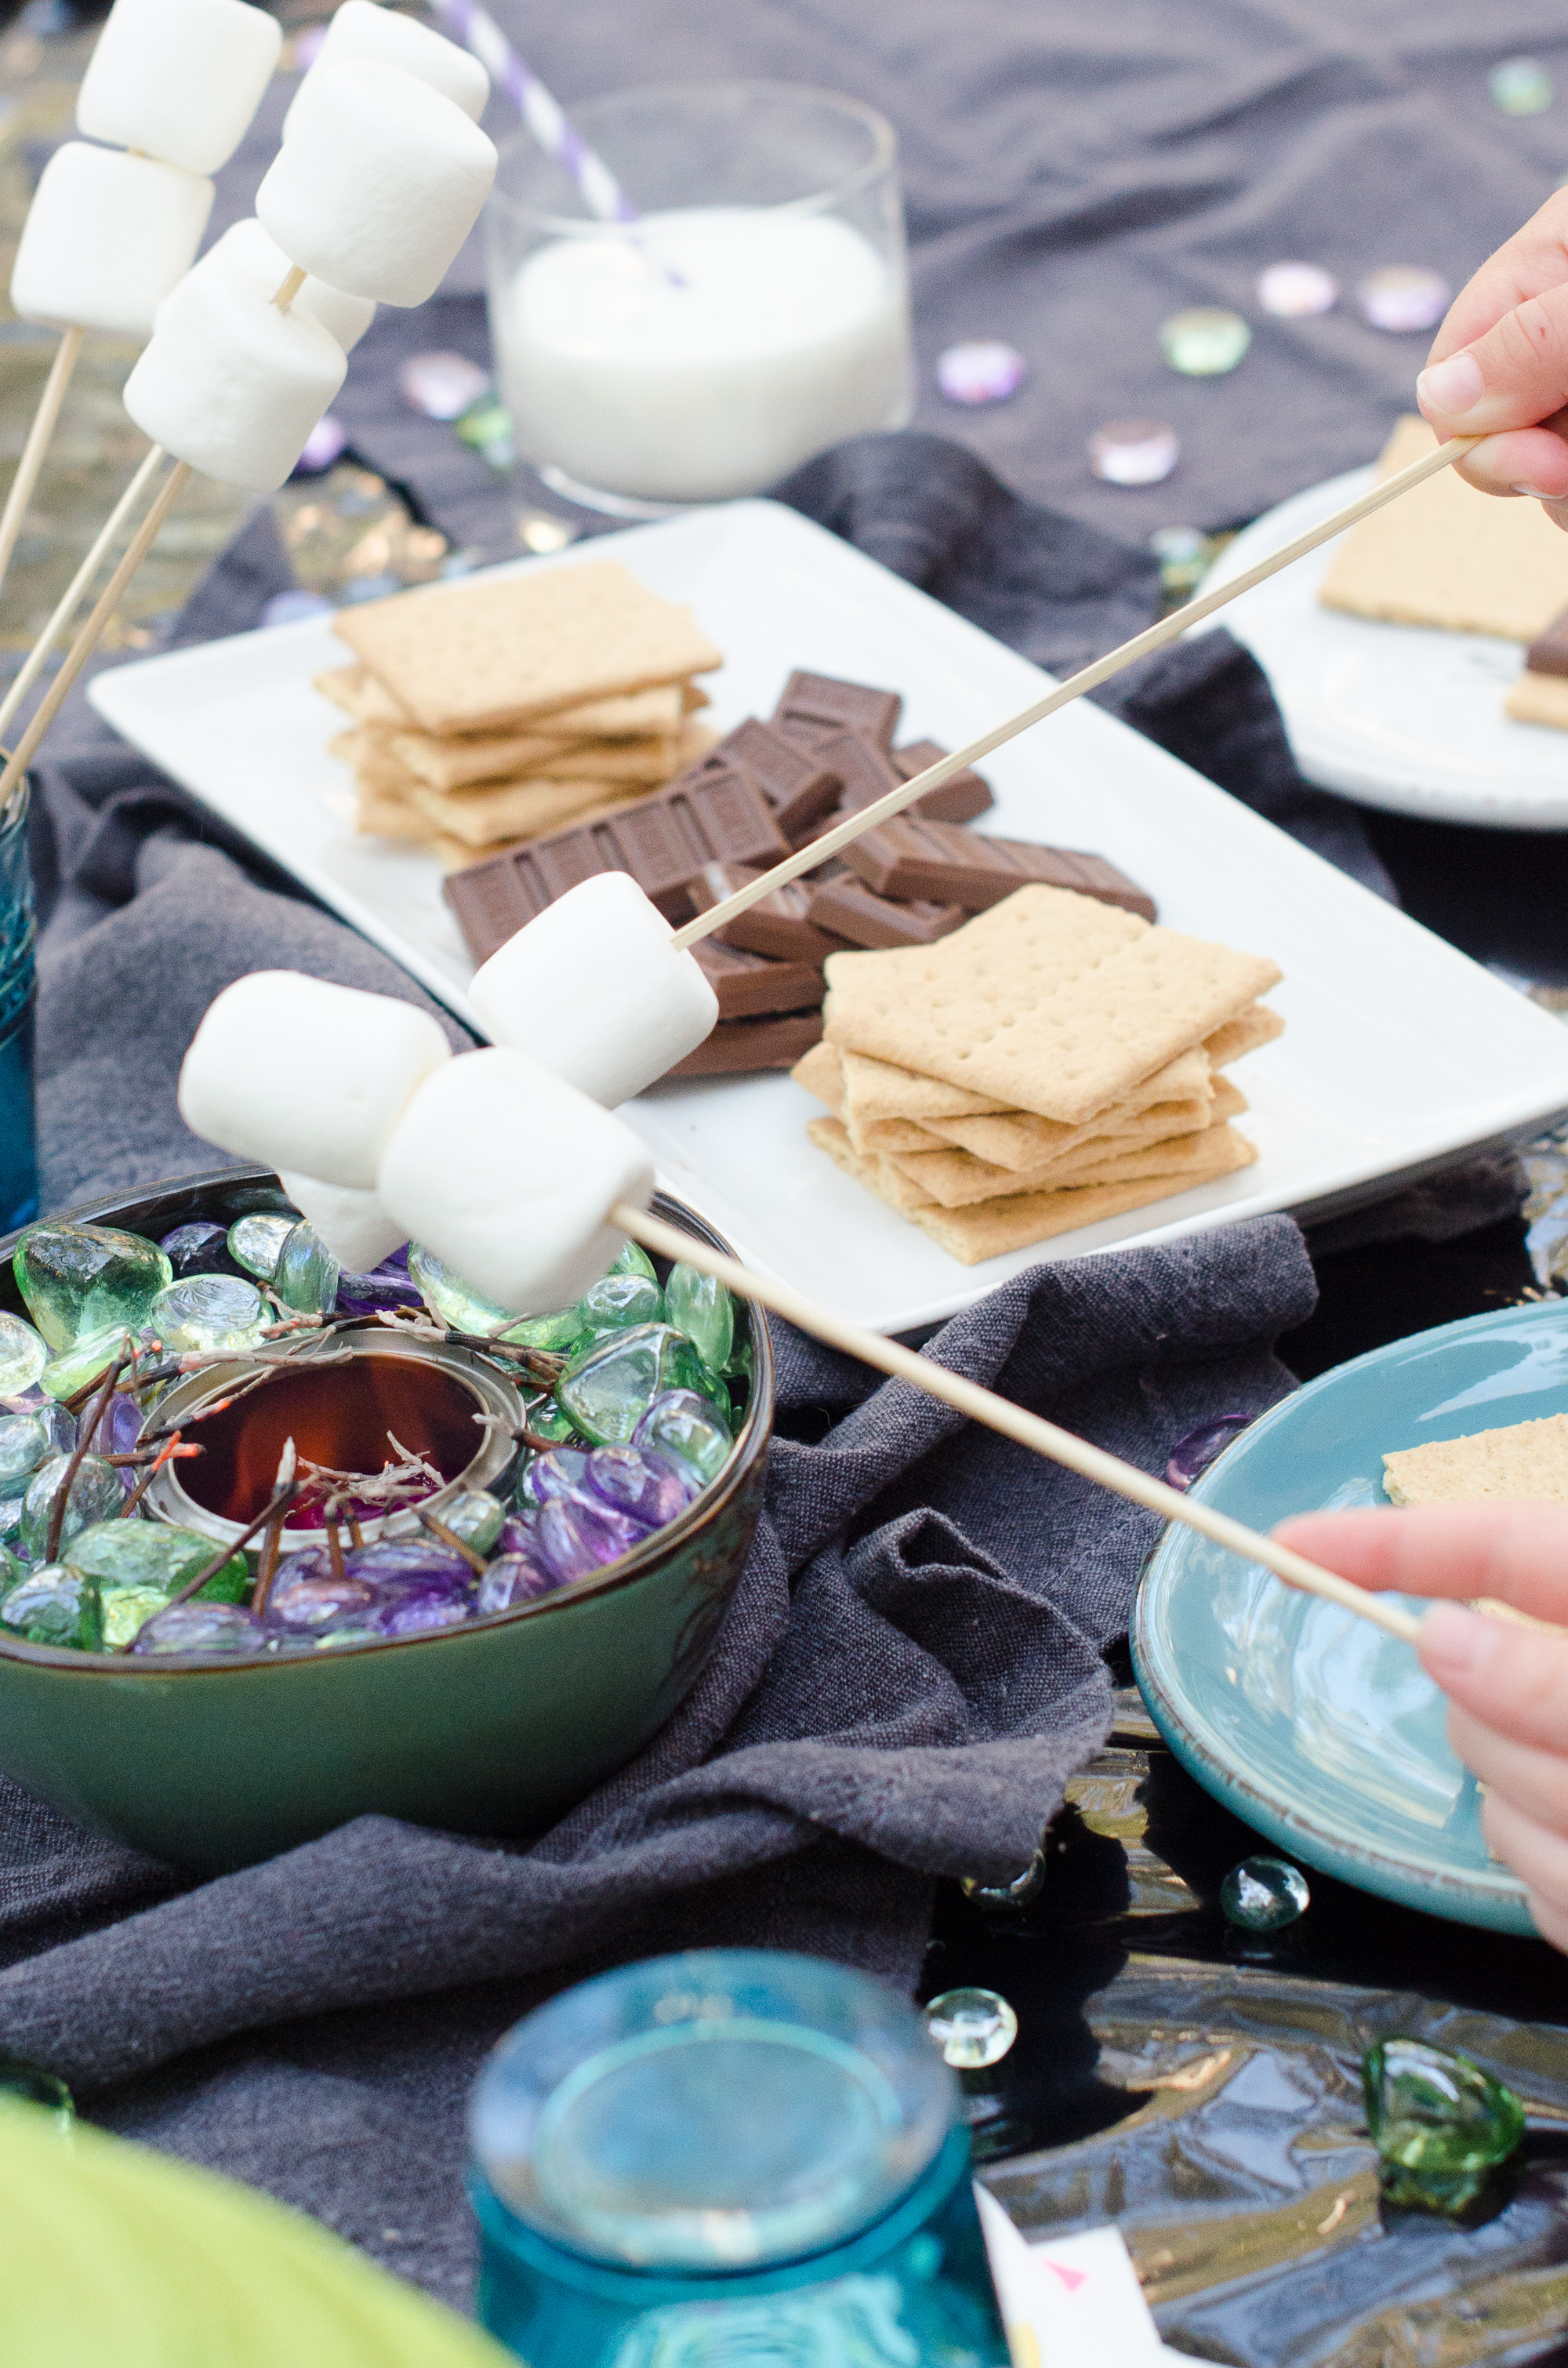 Tabletop S'mores from ChefSarahElizabeth.com